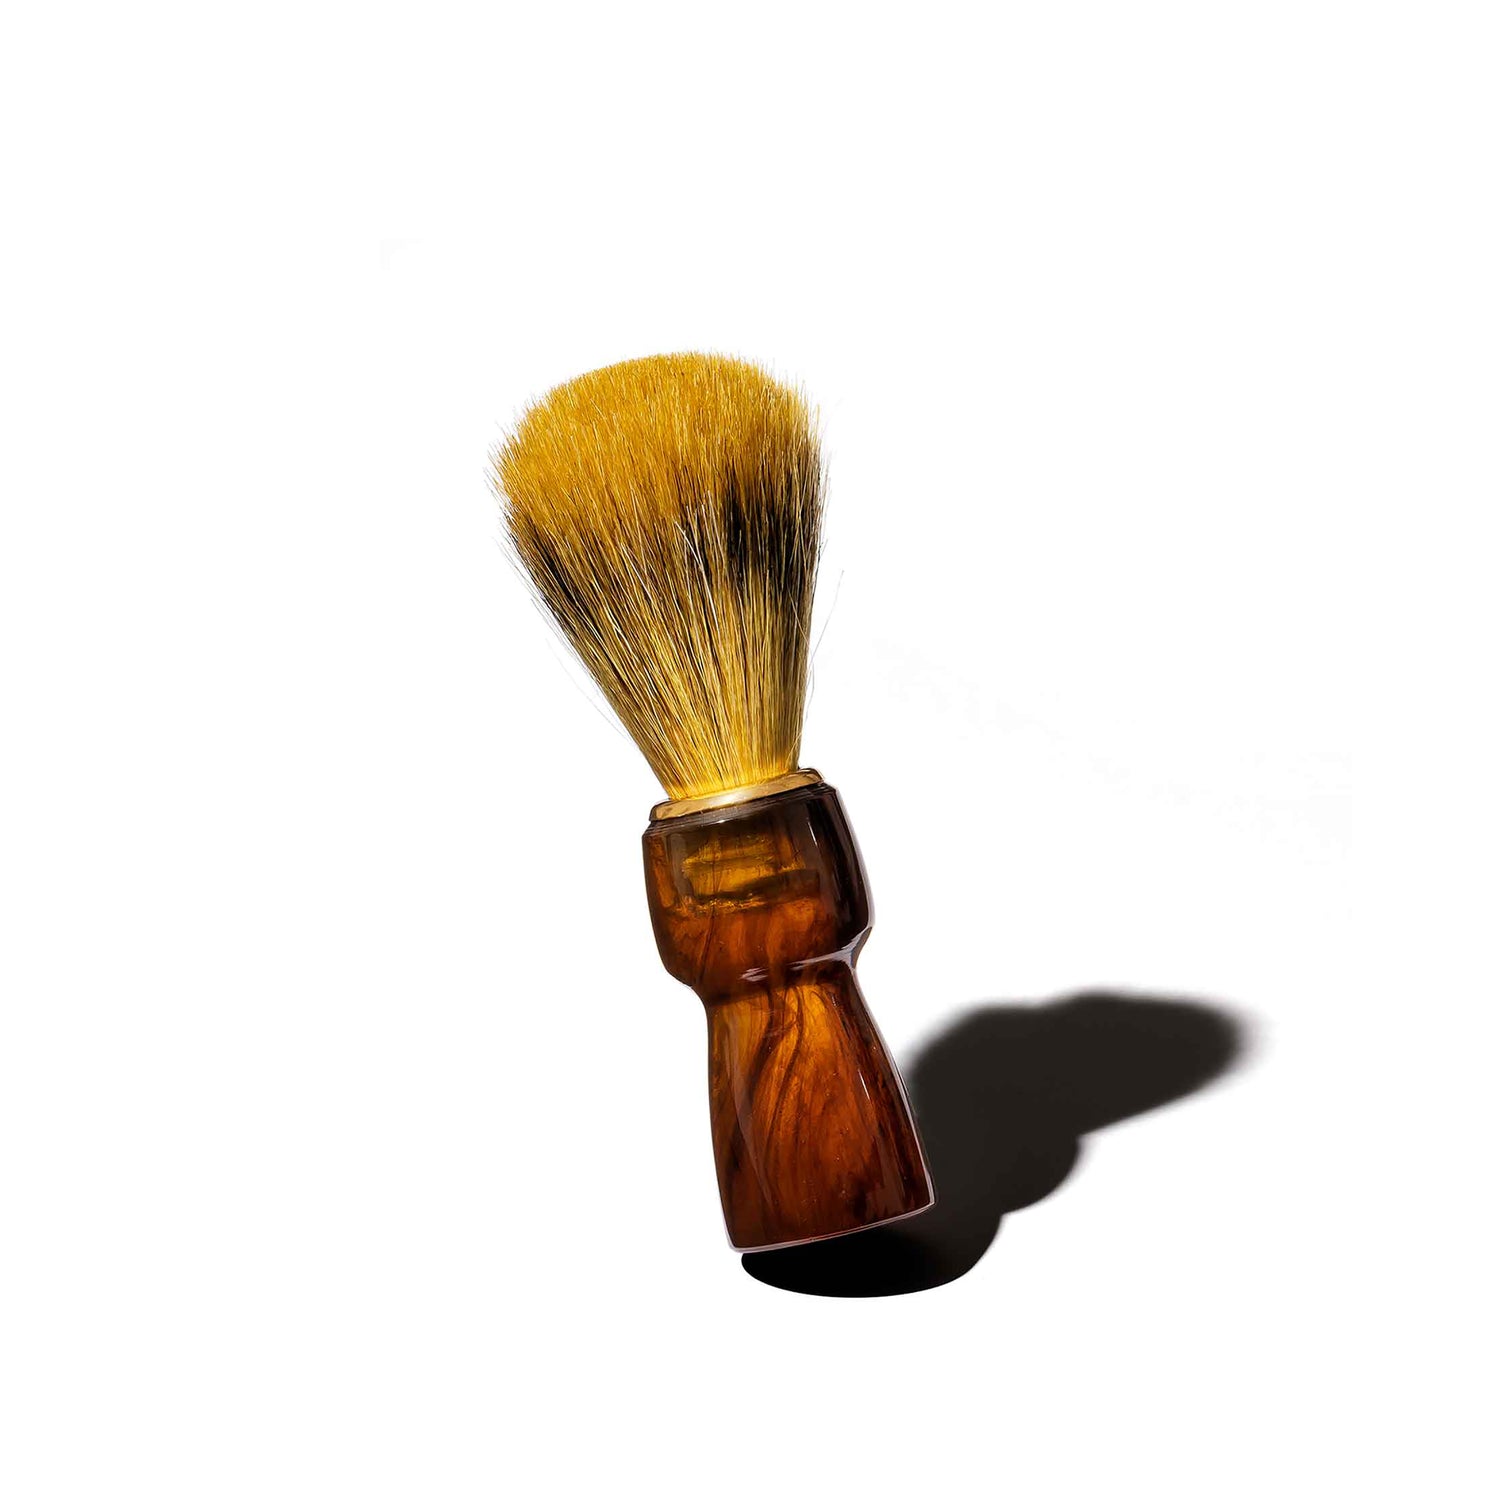 SHAVING BRUSH - THE YOUNGEST